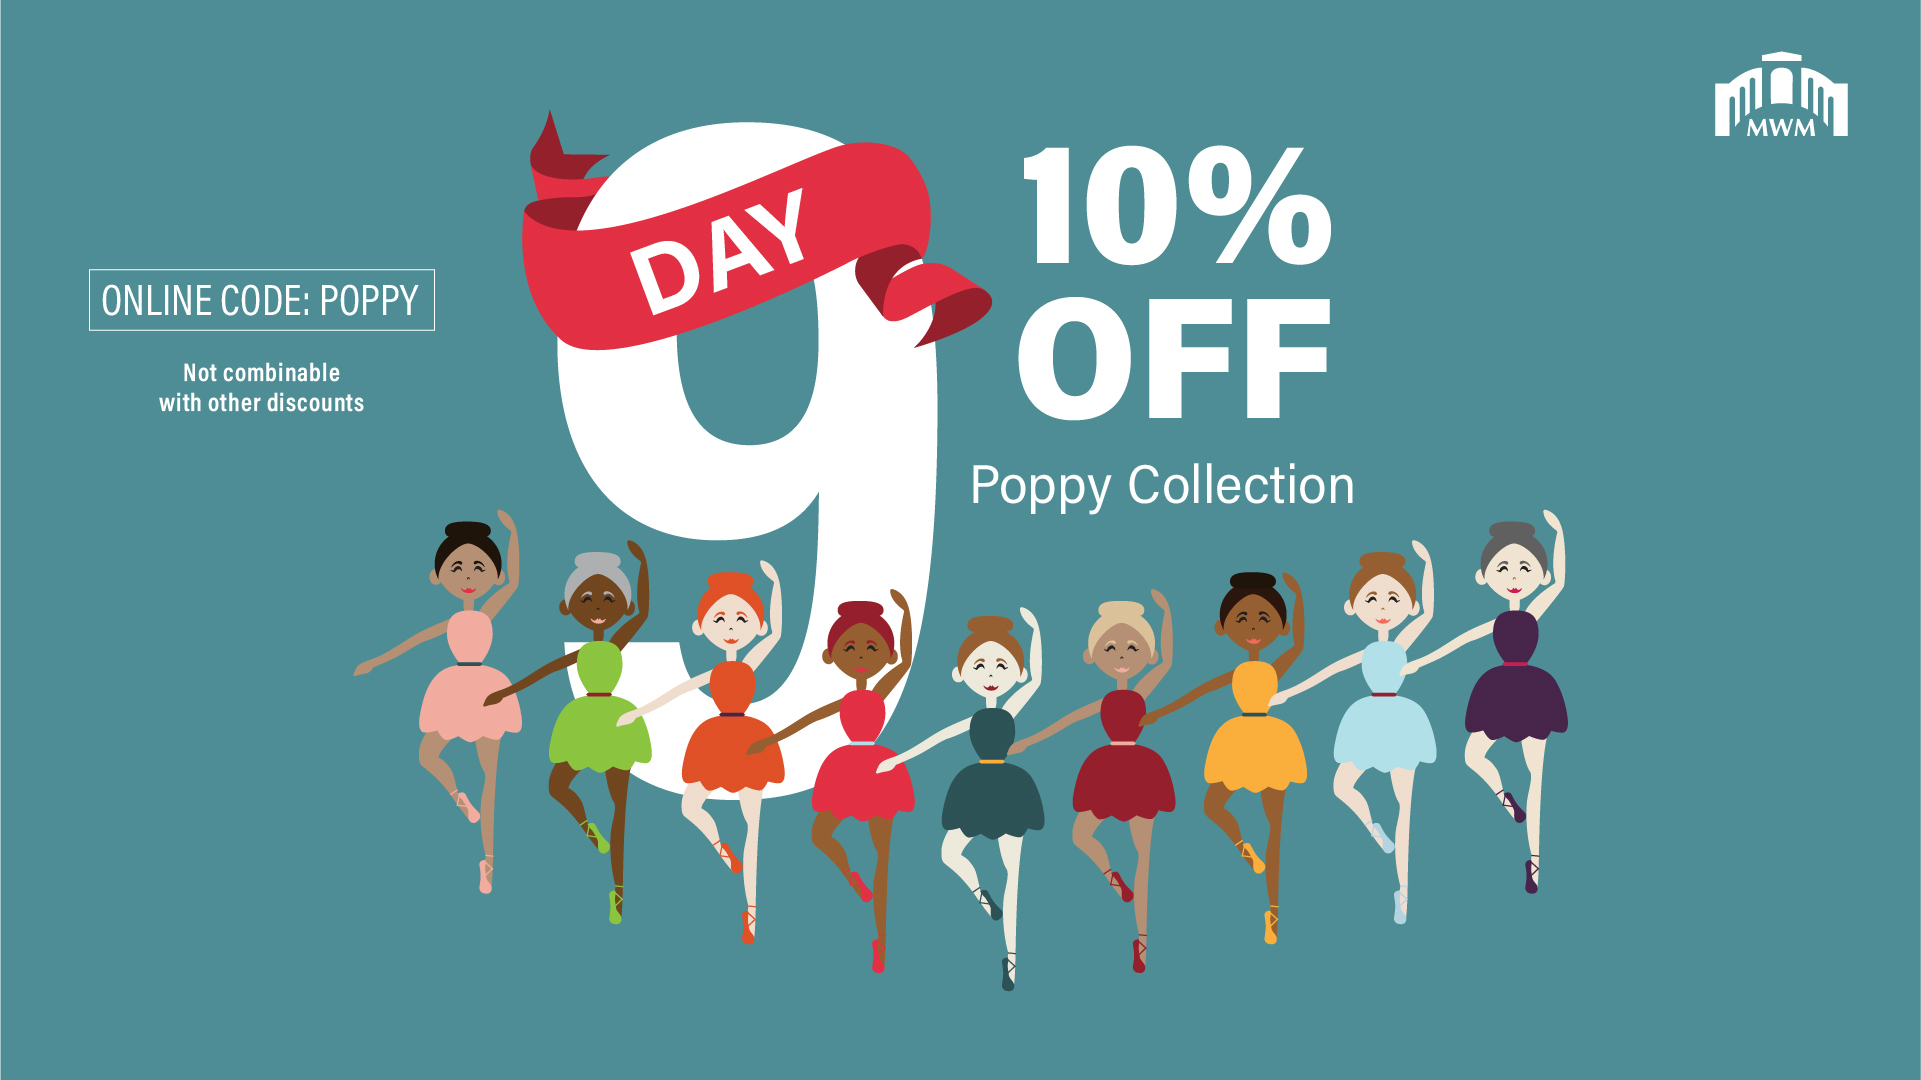 The Twelve Days of Christmas. Day 9 with nine dancers dancing. The words 10% off poppy collection.